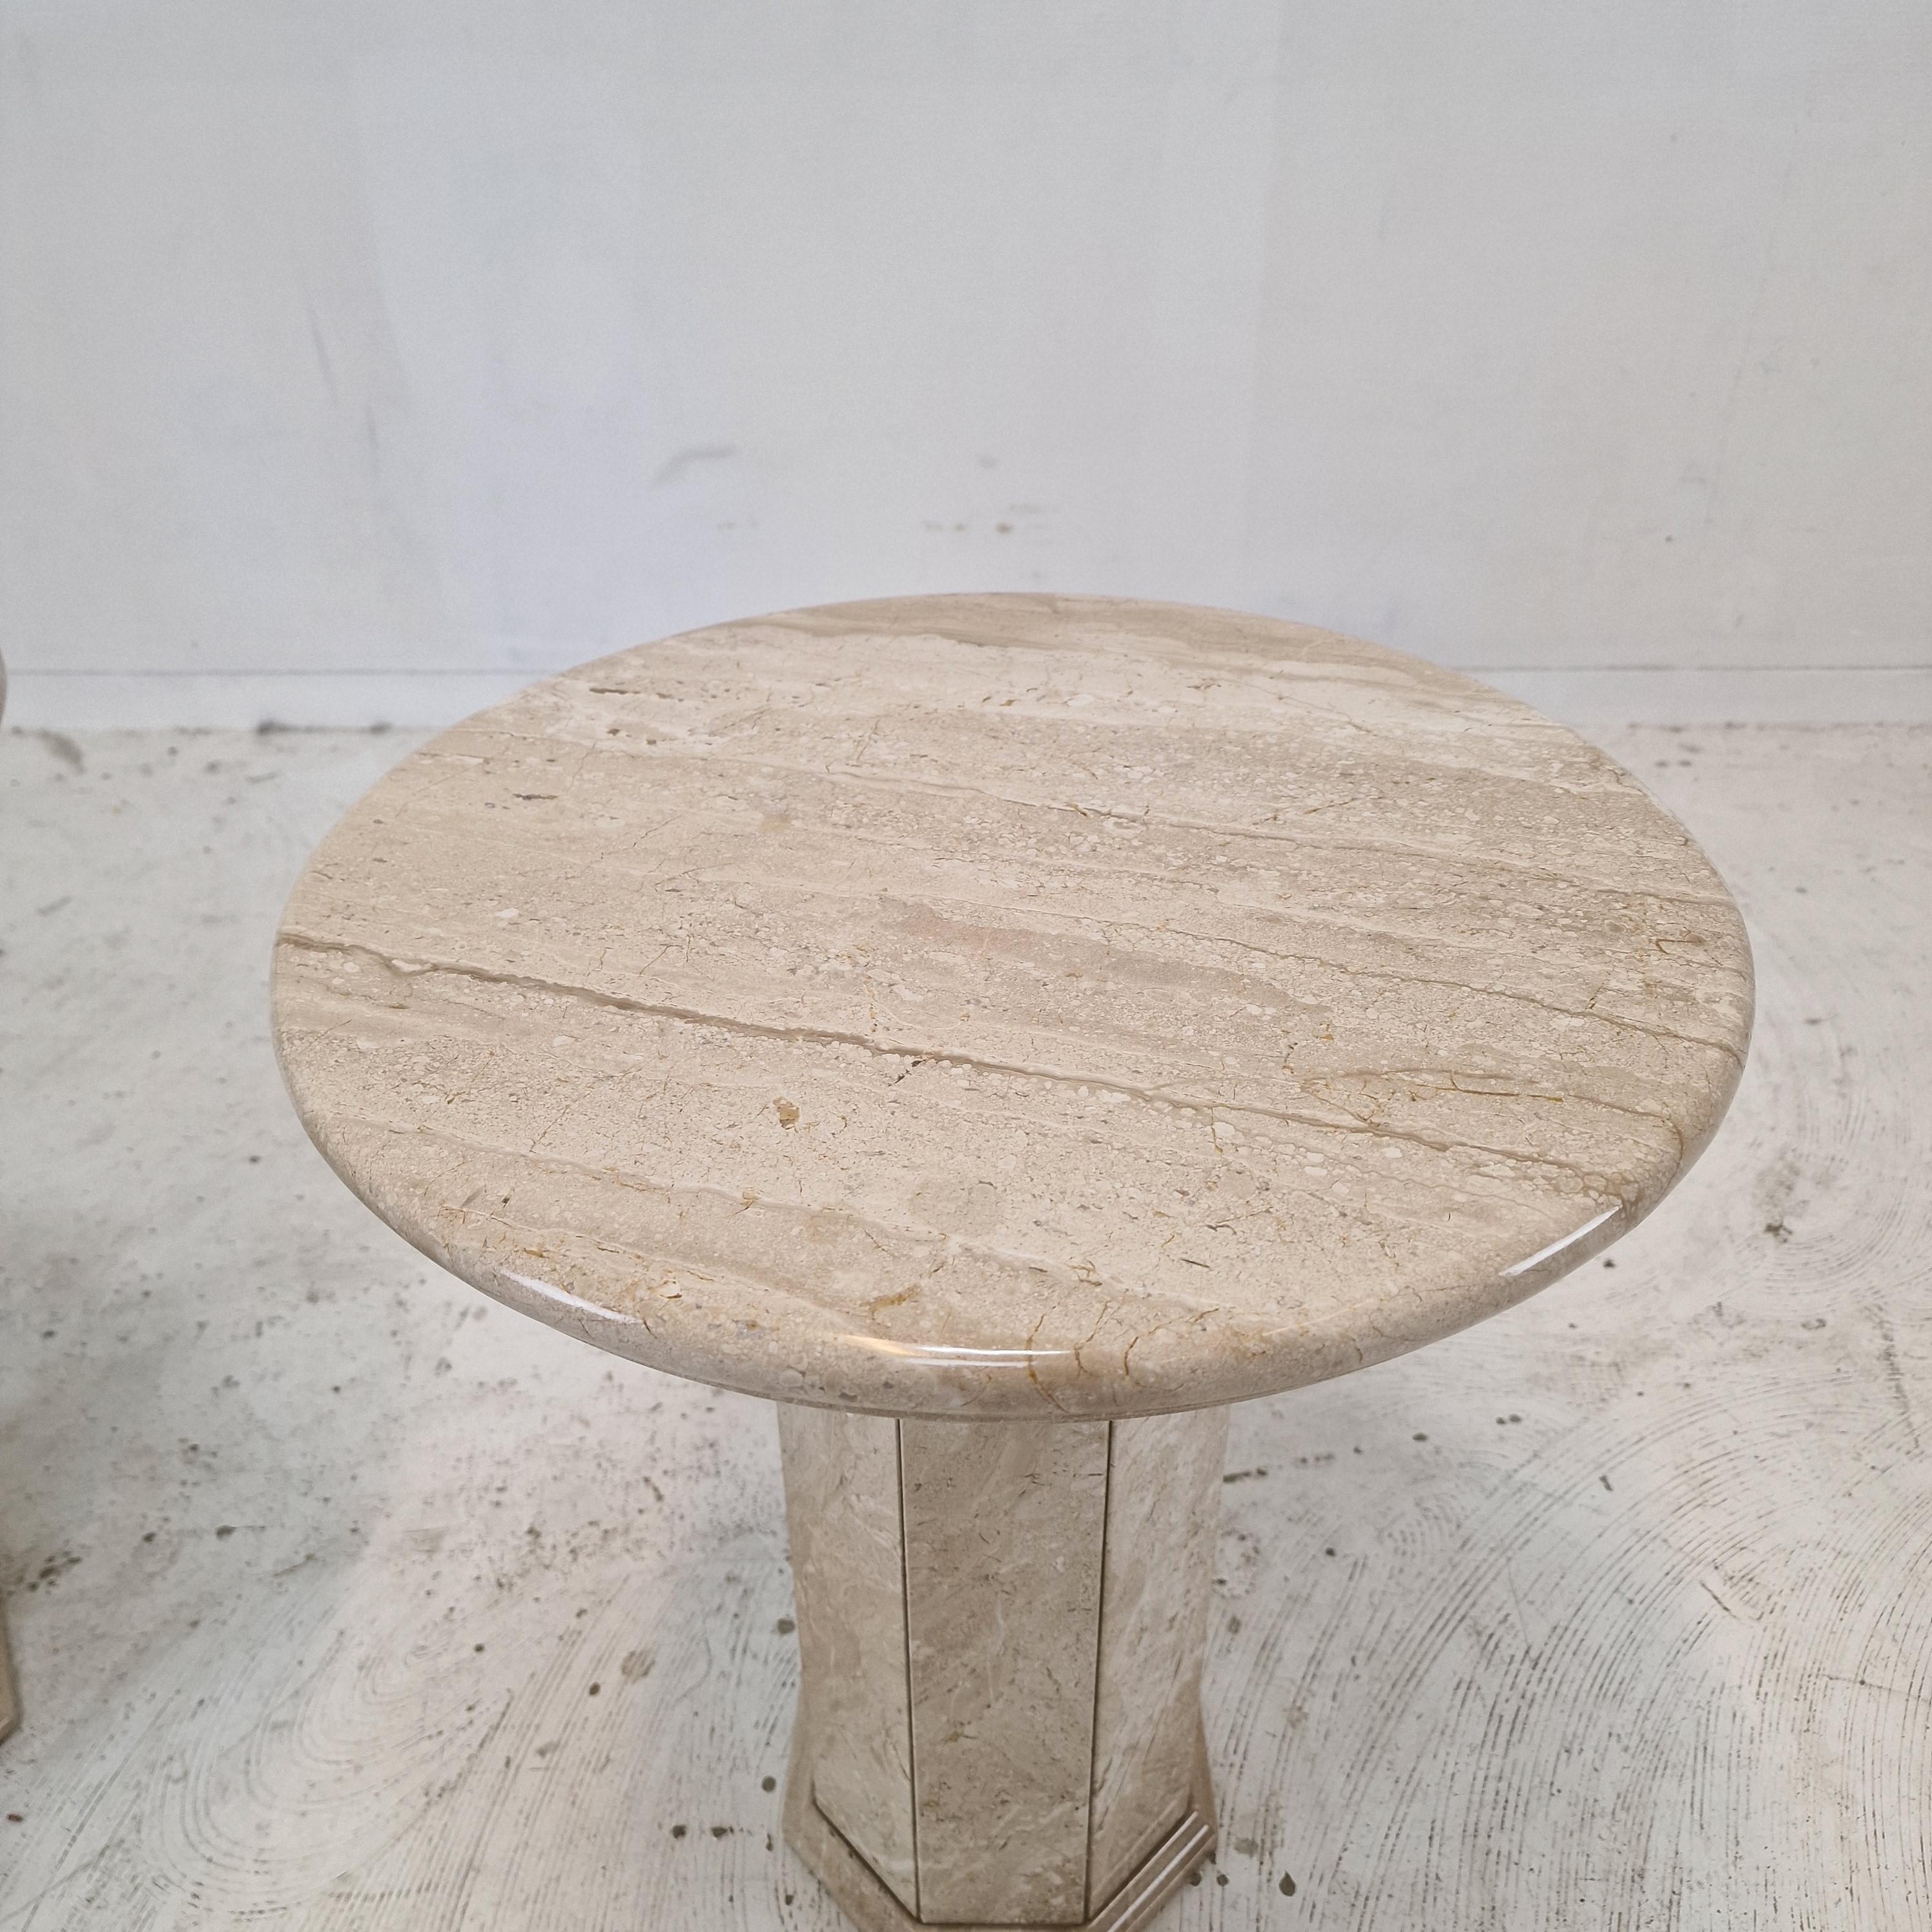 Set of 2 Italian Travertine Pedestals or Side Tables, 1980s For Sale 5